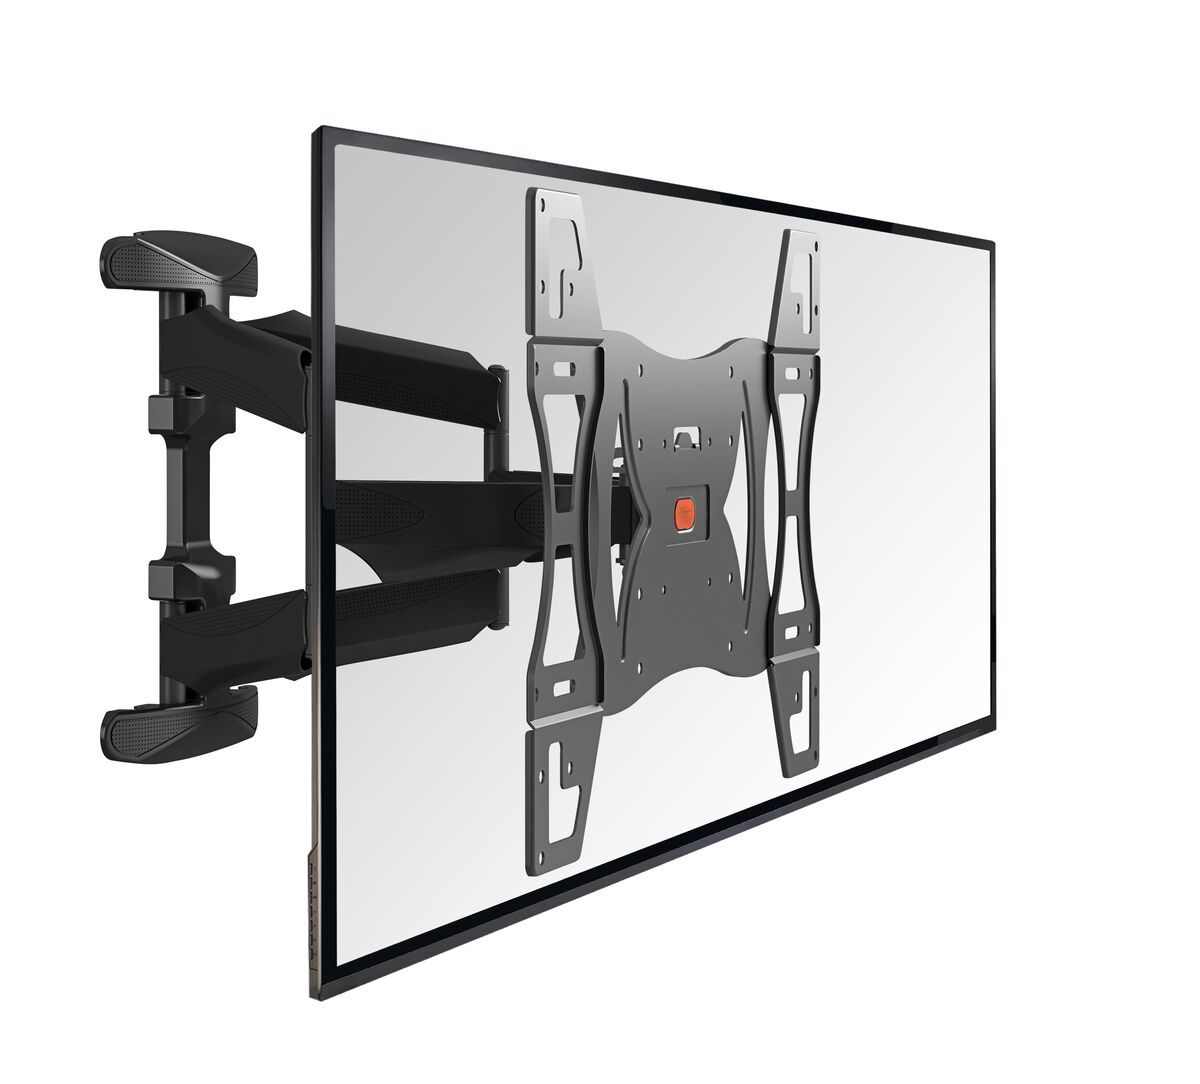 Vogel's BASE 45 L Full-Motion TV Wall Mount - Suitable for 40 up to 82 inch TVs - Full motion (up to 180°) - Tilt up to 15° - Product